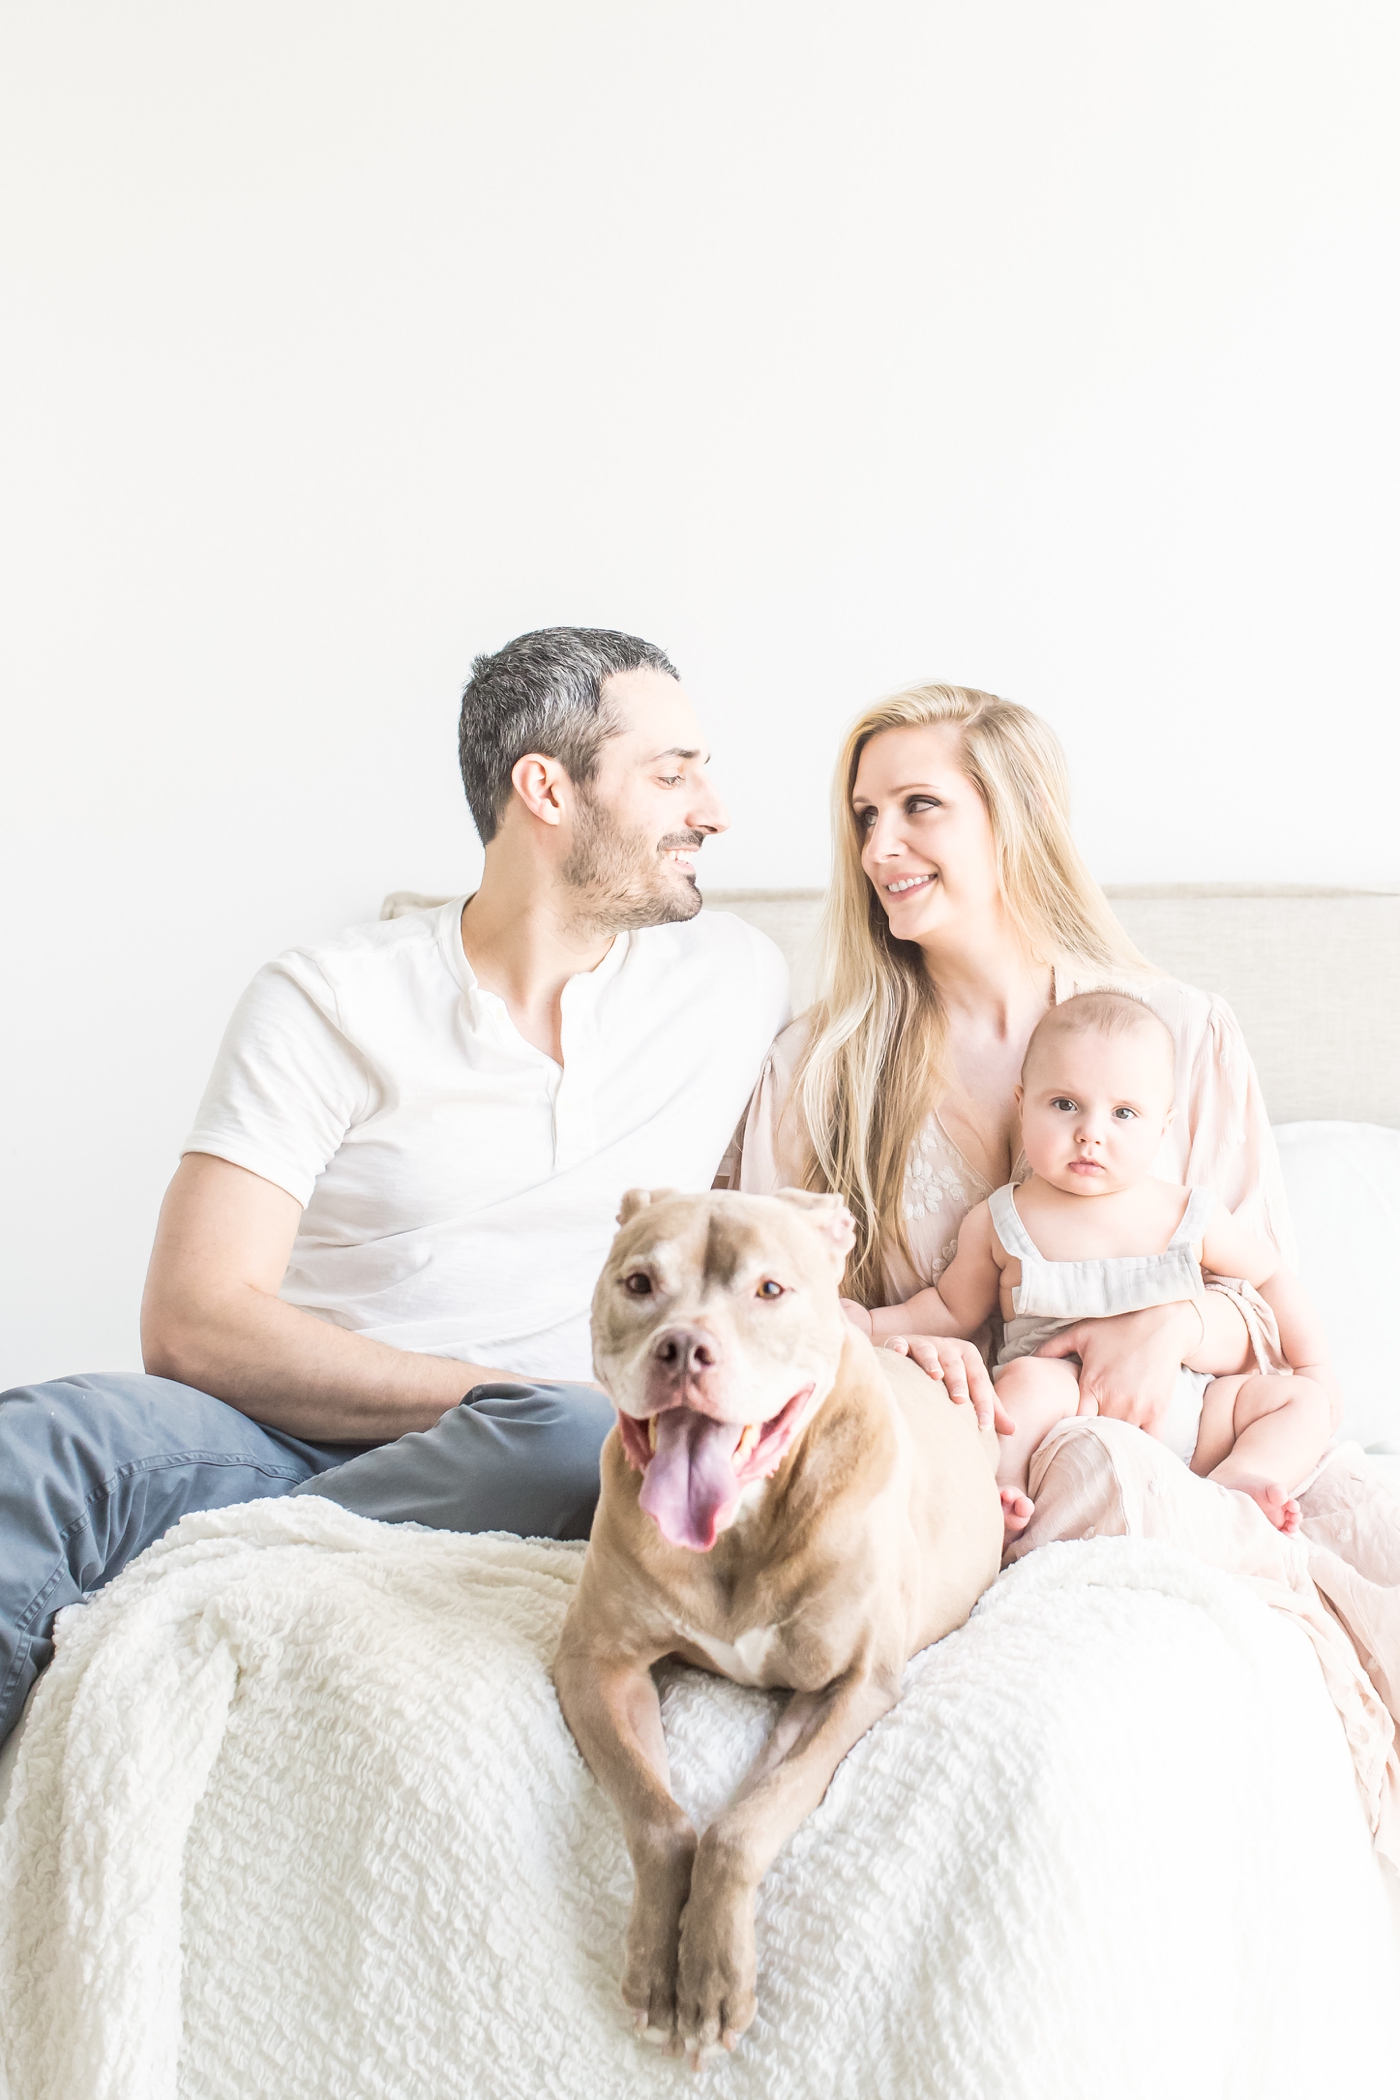 Family session with dog in Austin, TX studio. Photo by Sana Ahmed Photography.